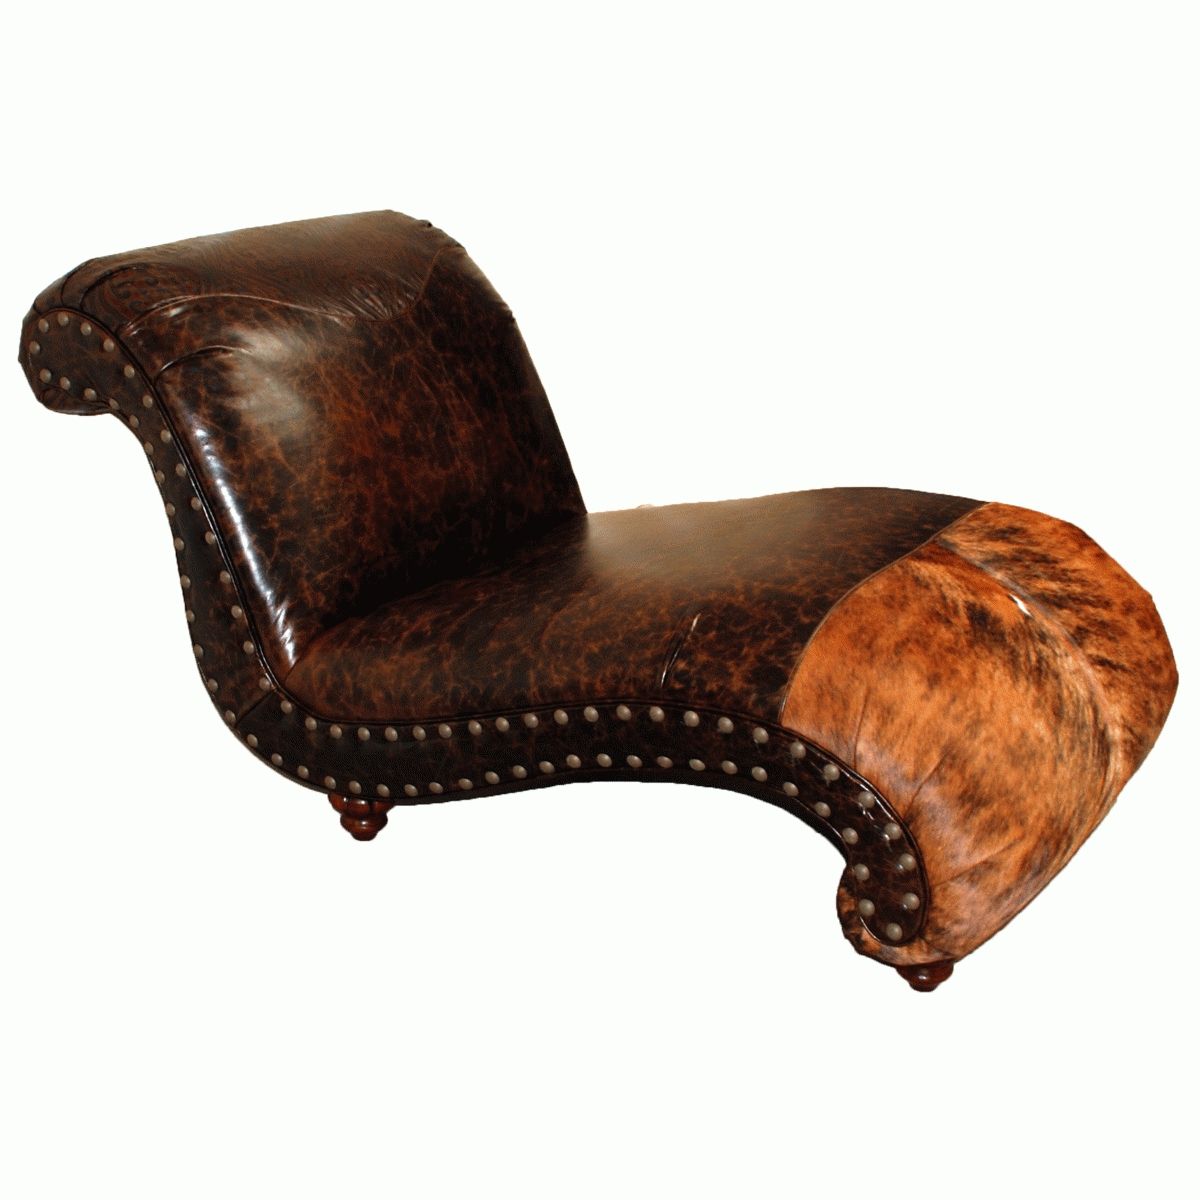 Newest Western Leather Furniture & Cowboy Furnishings From Lones Star Regarding Leather Chaise Lounge Chairs (View 14 of 15)